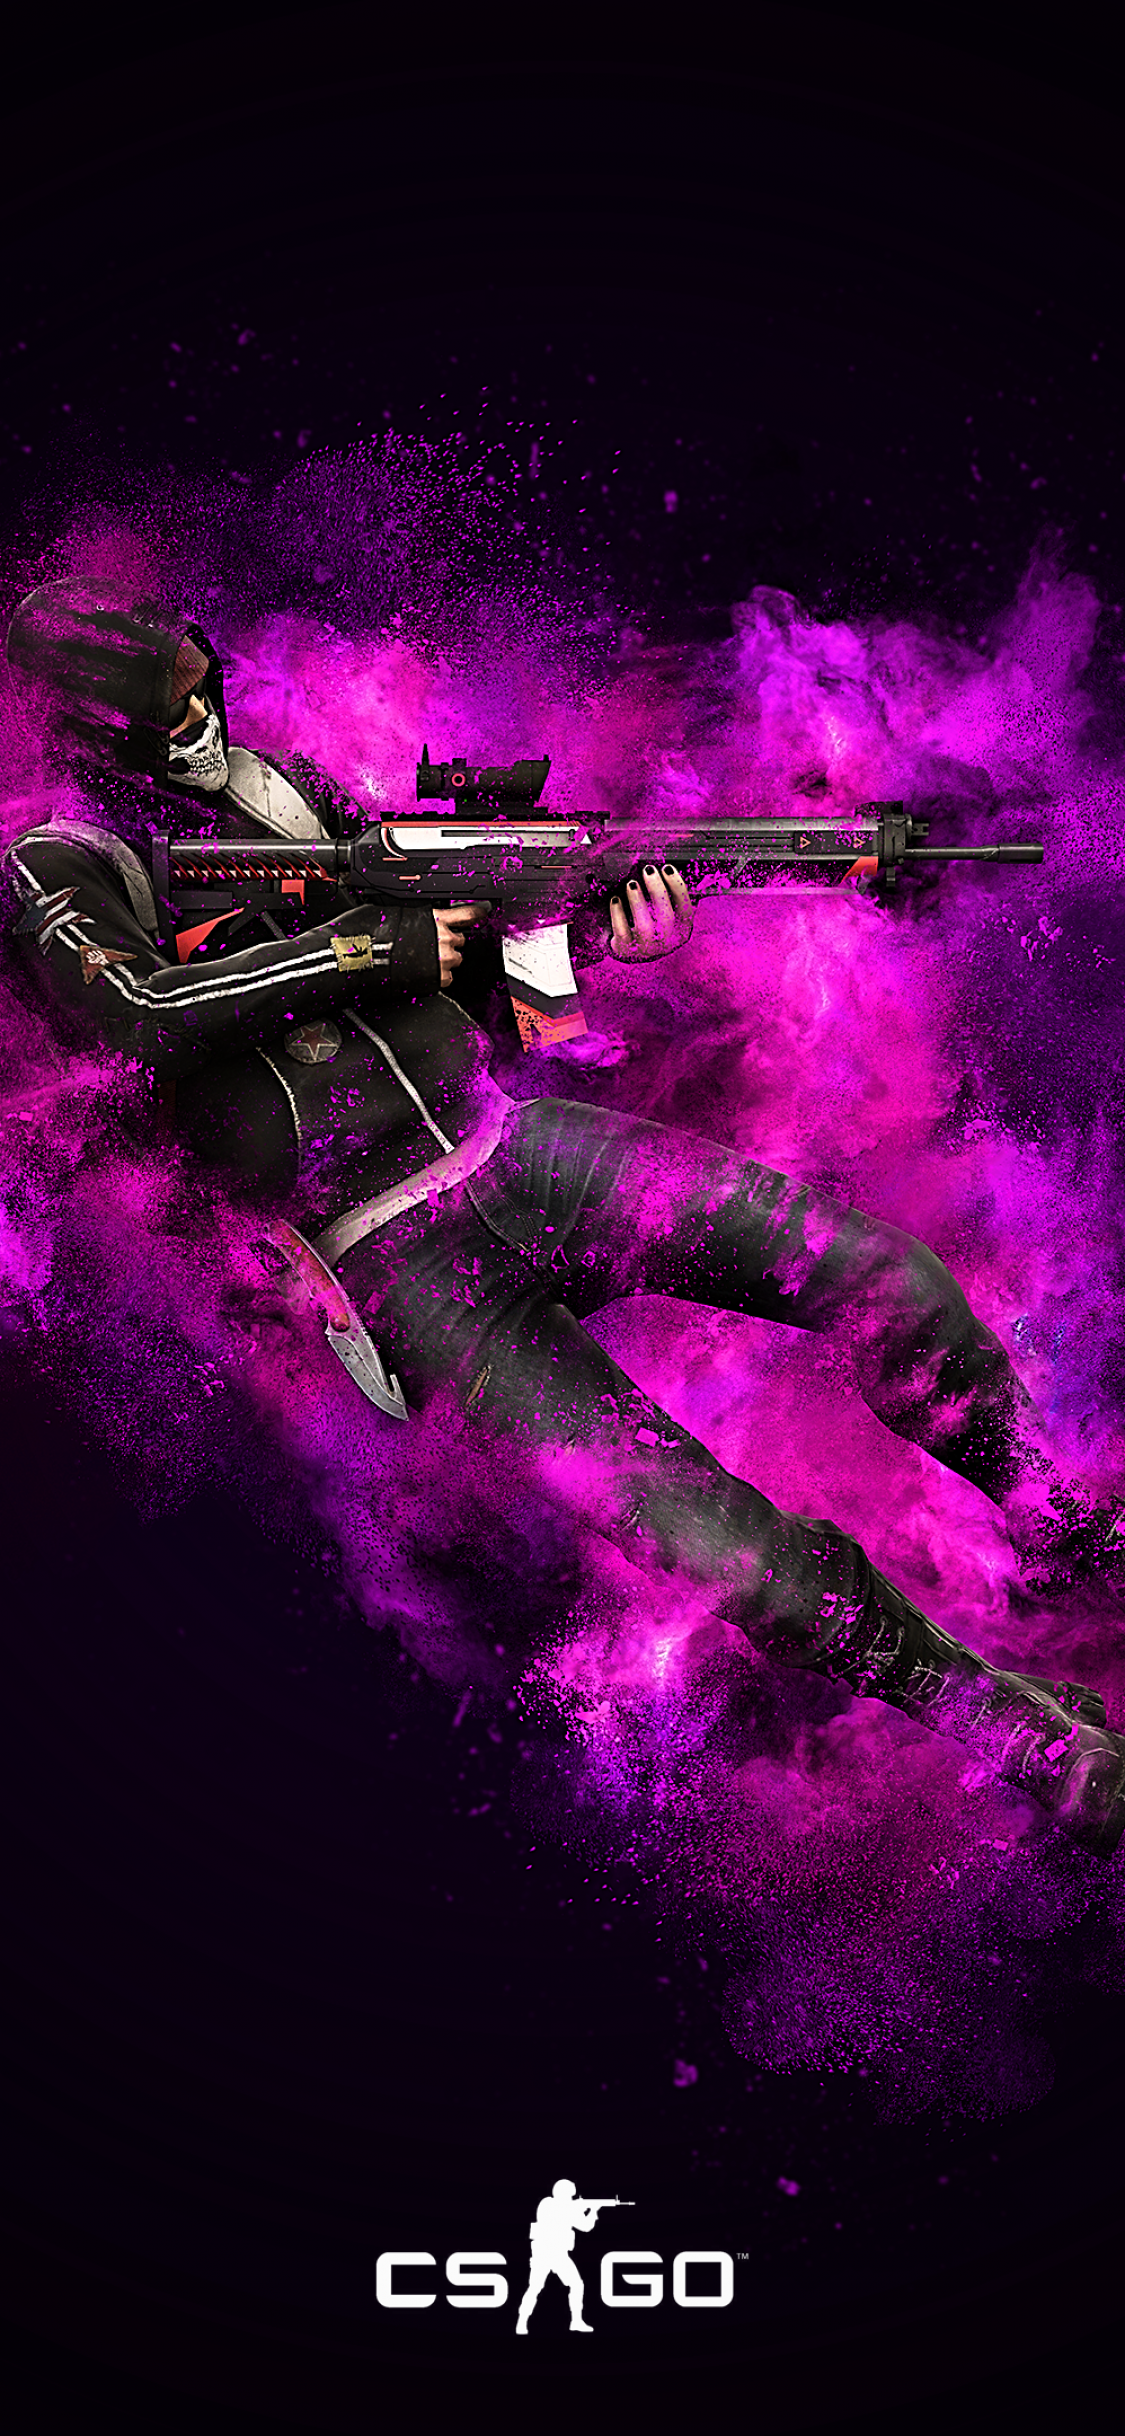 Download wallpaper: Counter Strike: Global Offensive 1080x1920